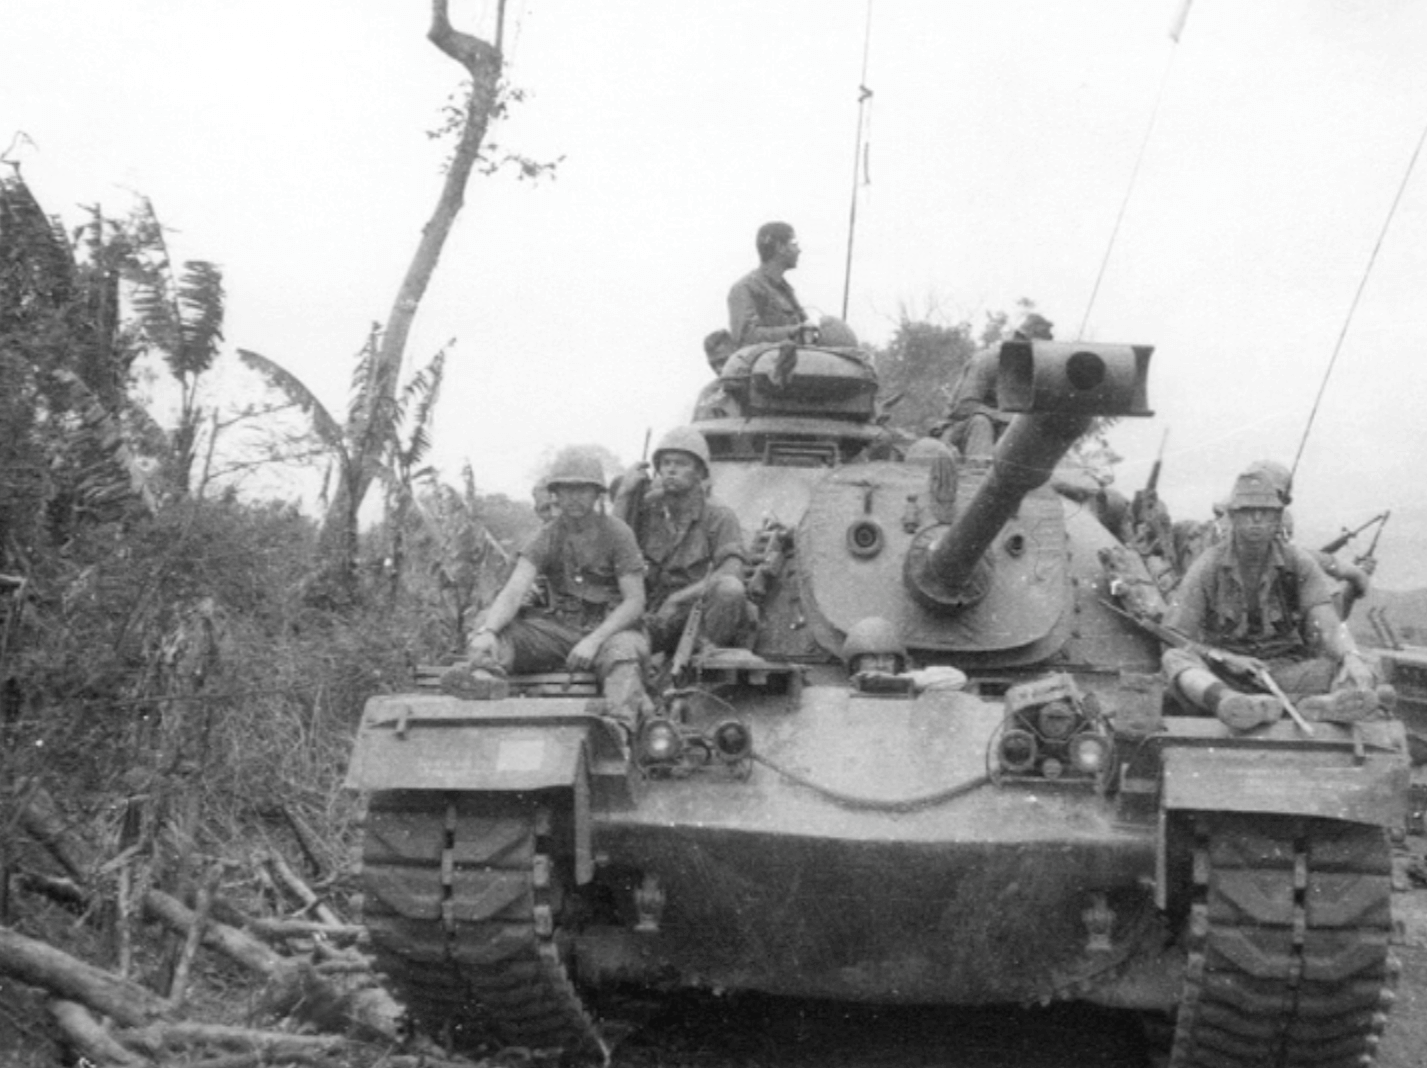 A tank with several men sitting on top of it.